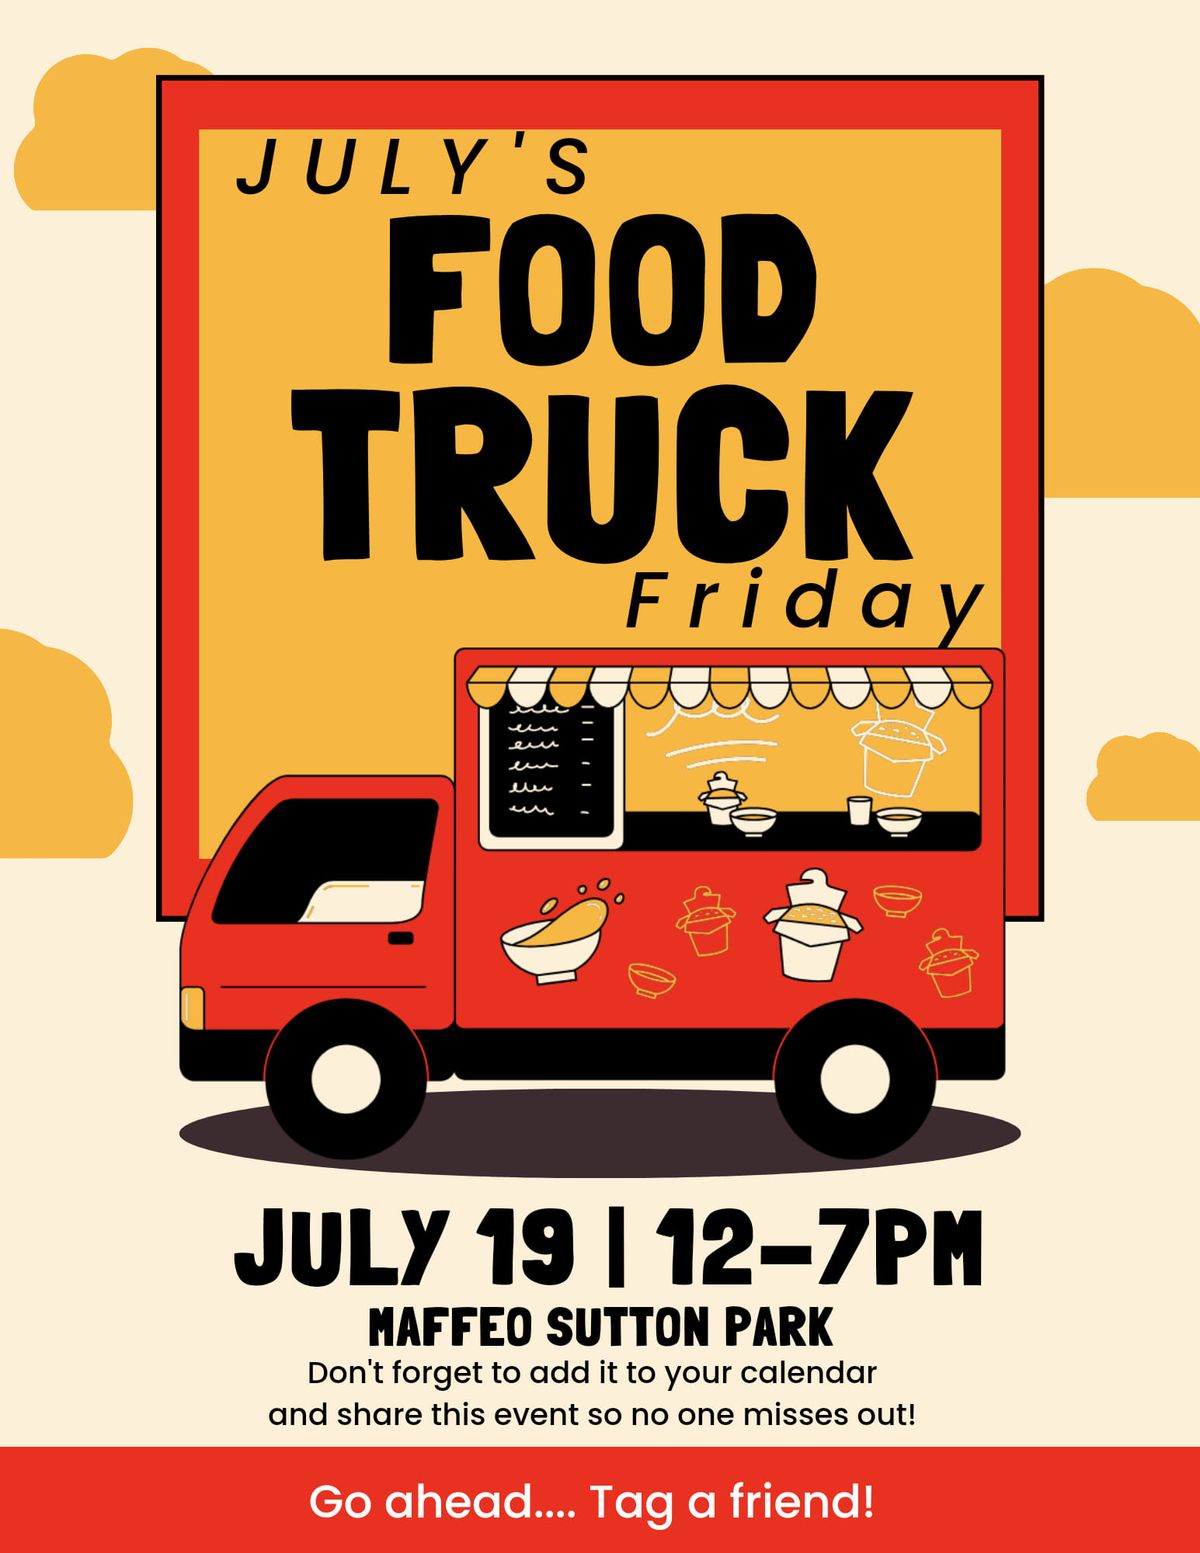 July's Food Truck Friday